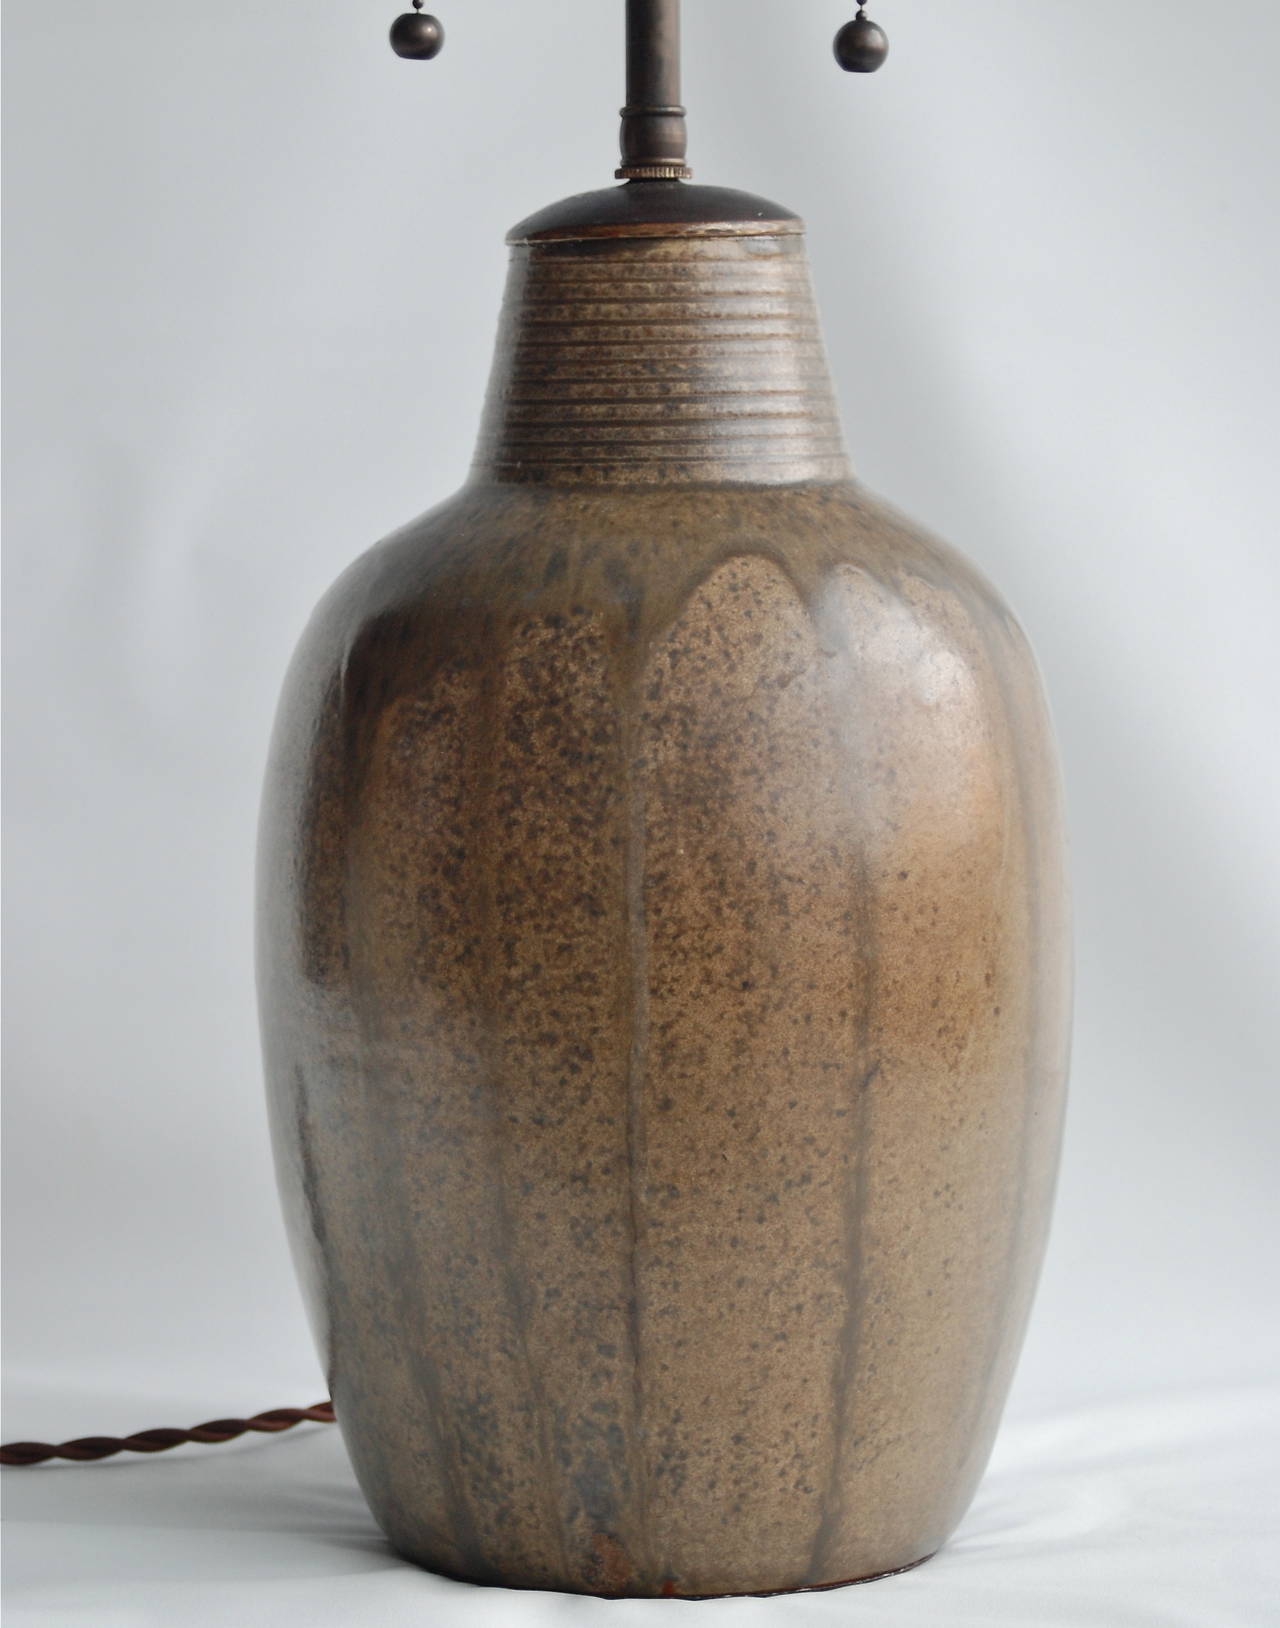 Patrick Nordström, table lamp, ceramic.
A table lamp by Patrick Nordstrom (1870-1929), Sweden. Ceramics with brown glaze. Marked: 'NP ISLE 1924.' Made in his own workshop in Islev.
Dimension: H 23